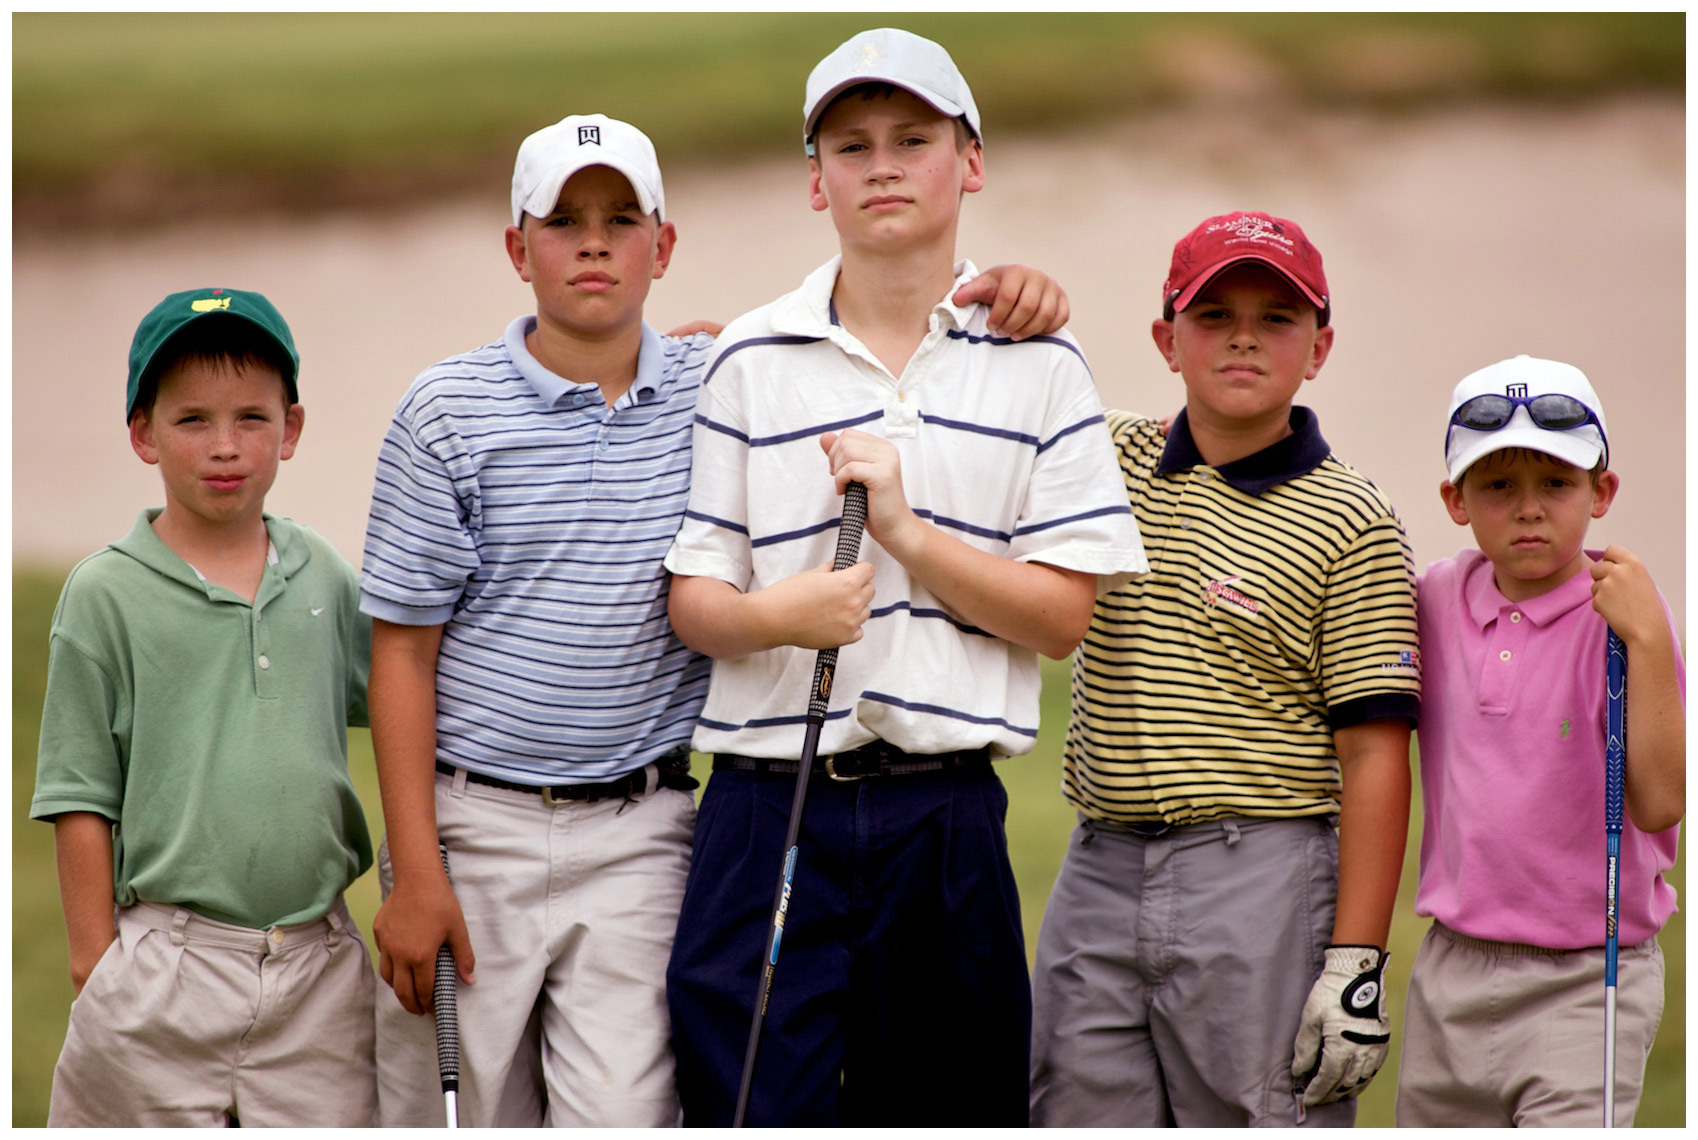 First Tee golfers in Jacksonville, Florida